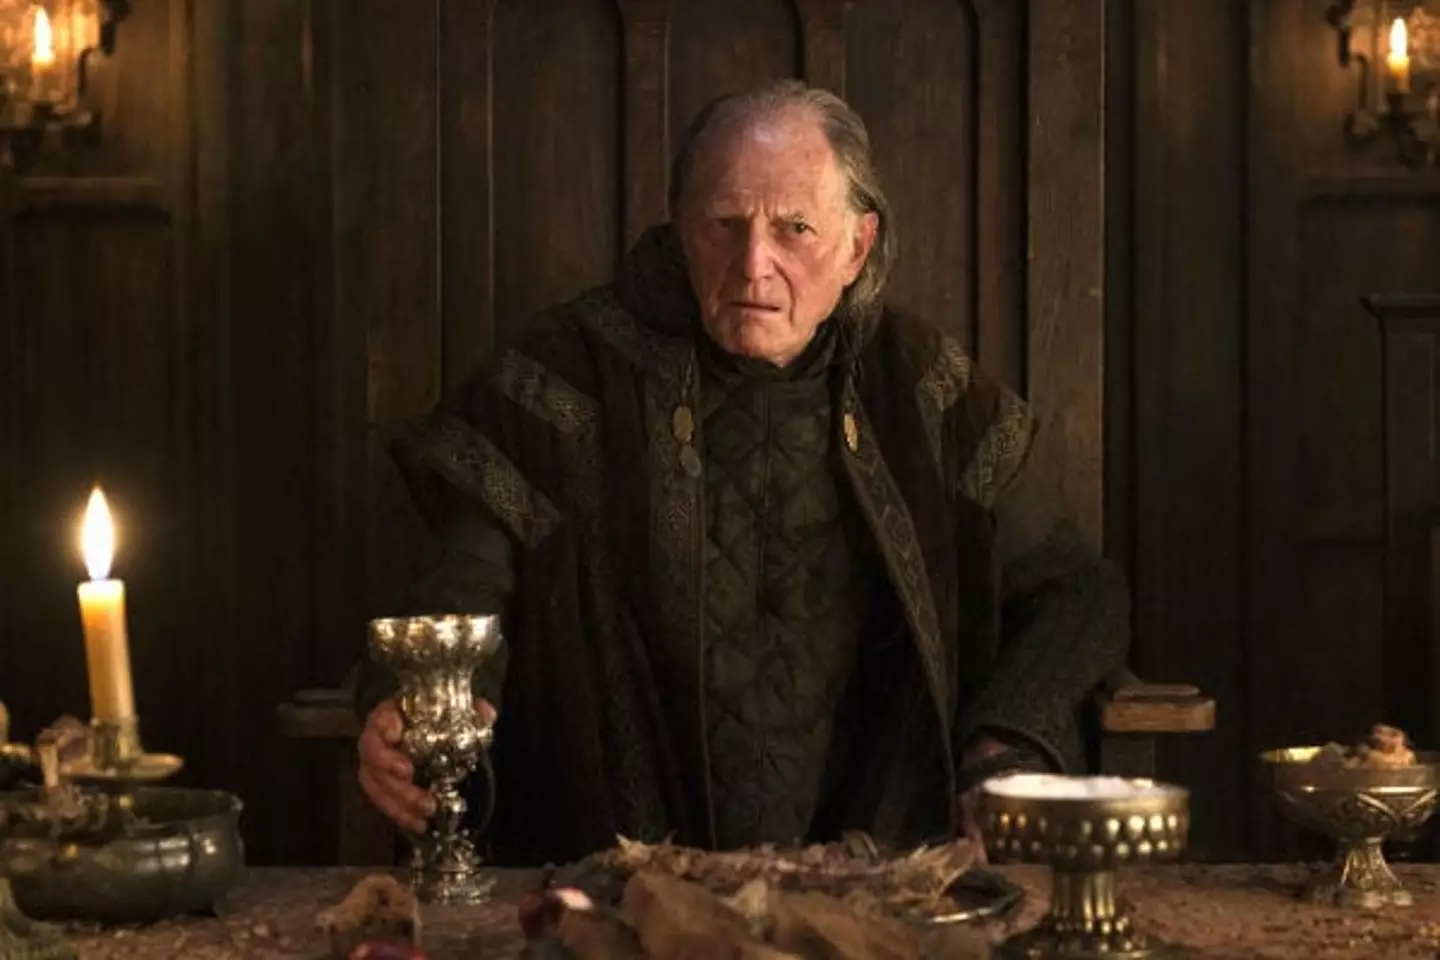 The evil Walder Frey was behind the whole thing.